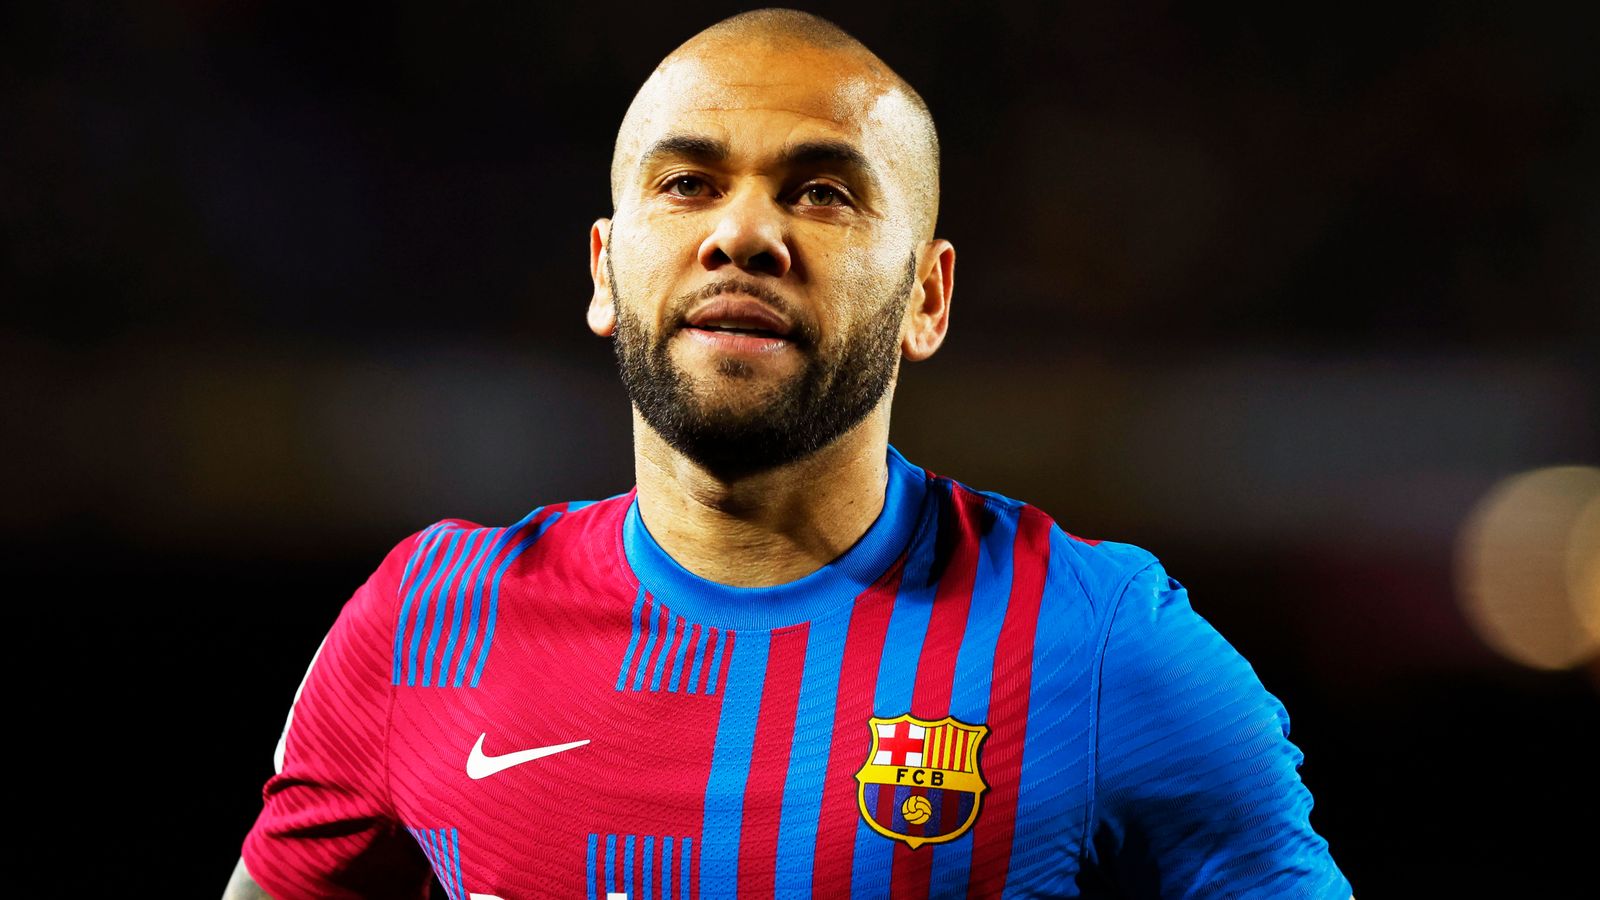 Former Barcelona player Dani Alves granted bail as he appeals sexual assault conviction